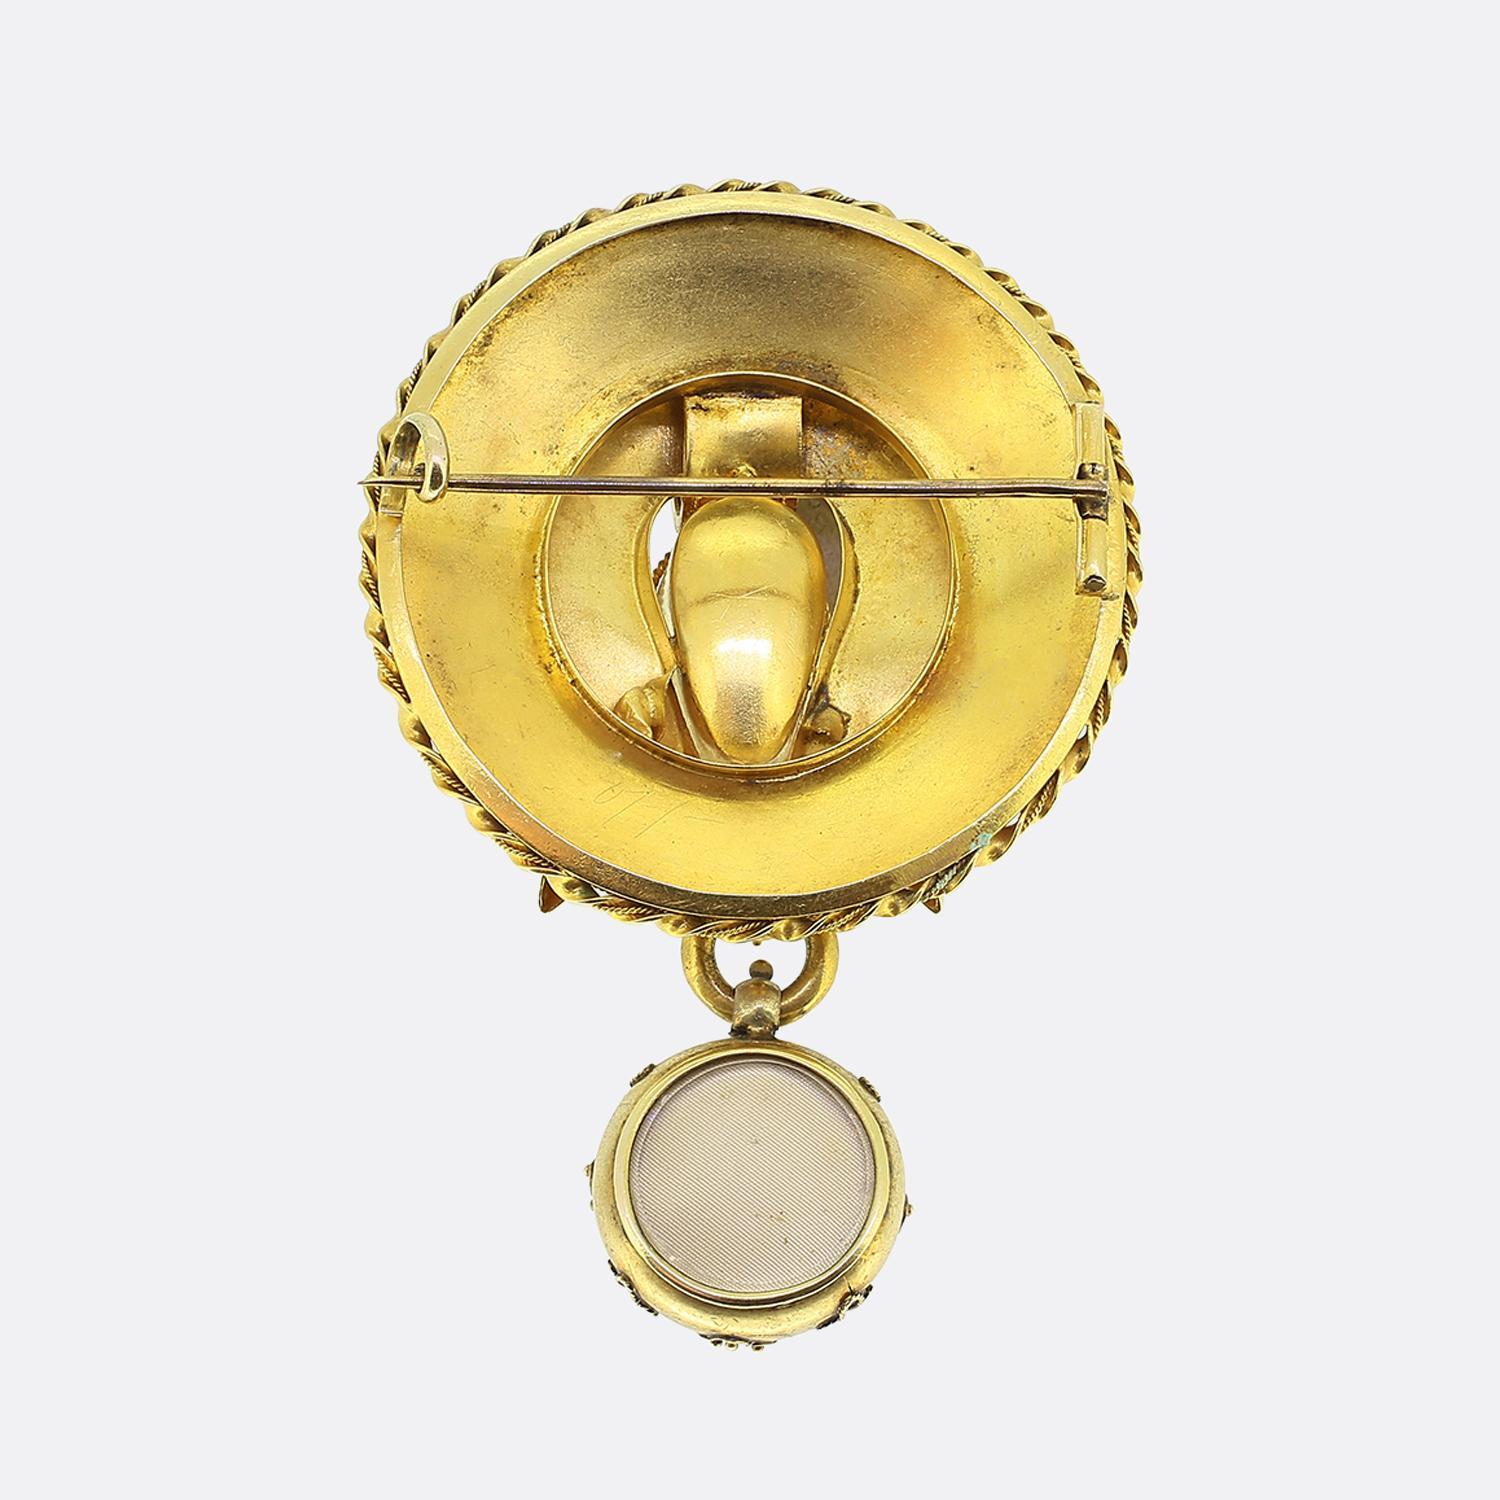 Here we have a fabulous drop brooch dating back to the Victorian period. This rounded piece has been crafted from a rich 18ct yellow gold and features multiple decorated layers consisting of scrolled and ribbed borderings. Swinging freely below the